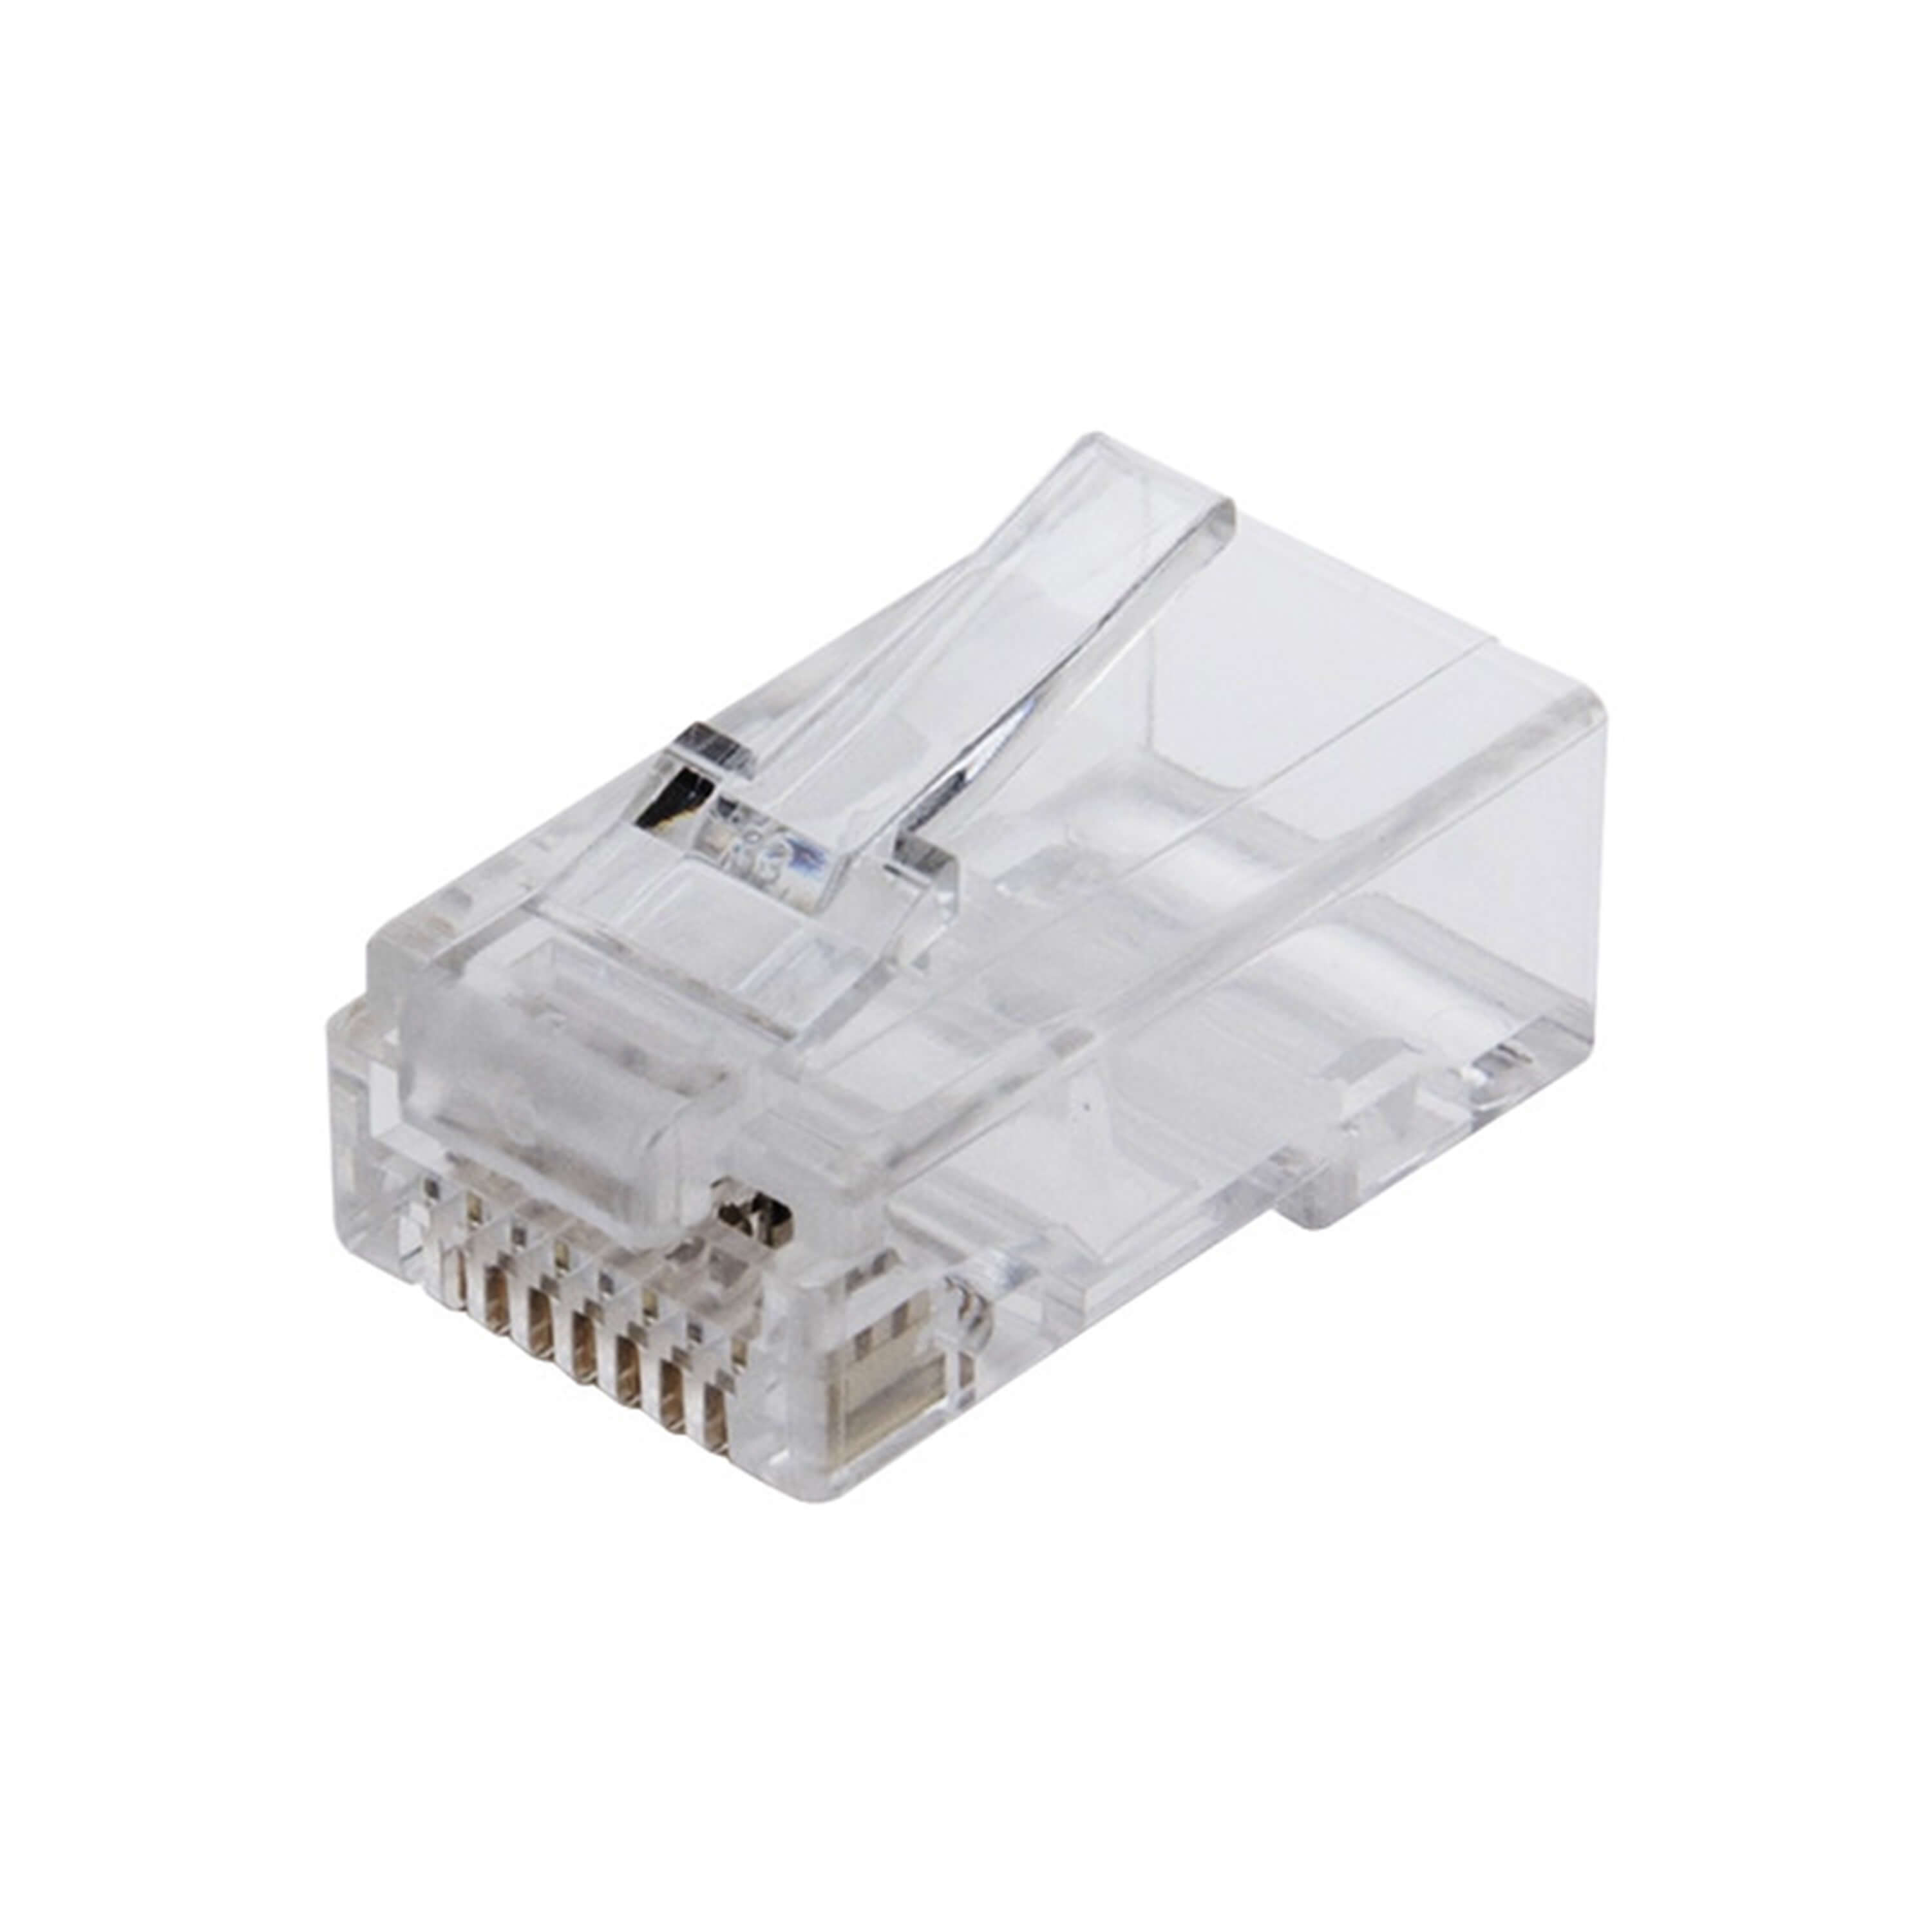 RJ45 contact for Cat6 10pack 8p8c for mounting with Tool